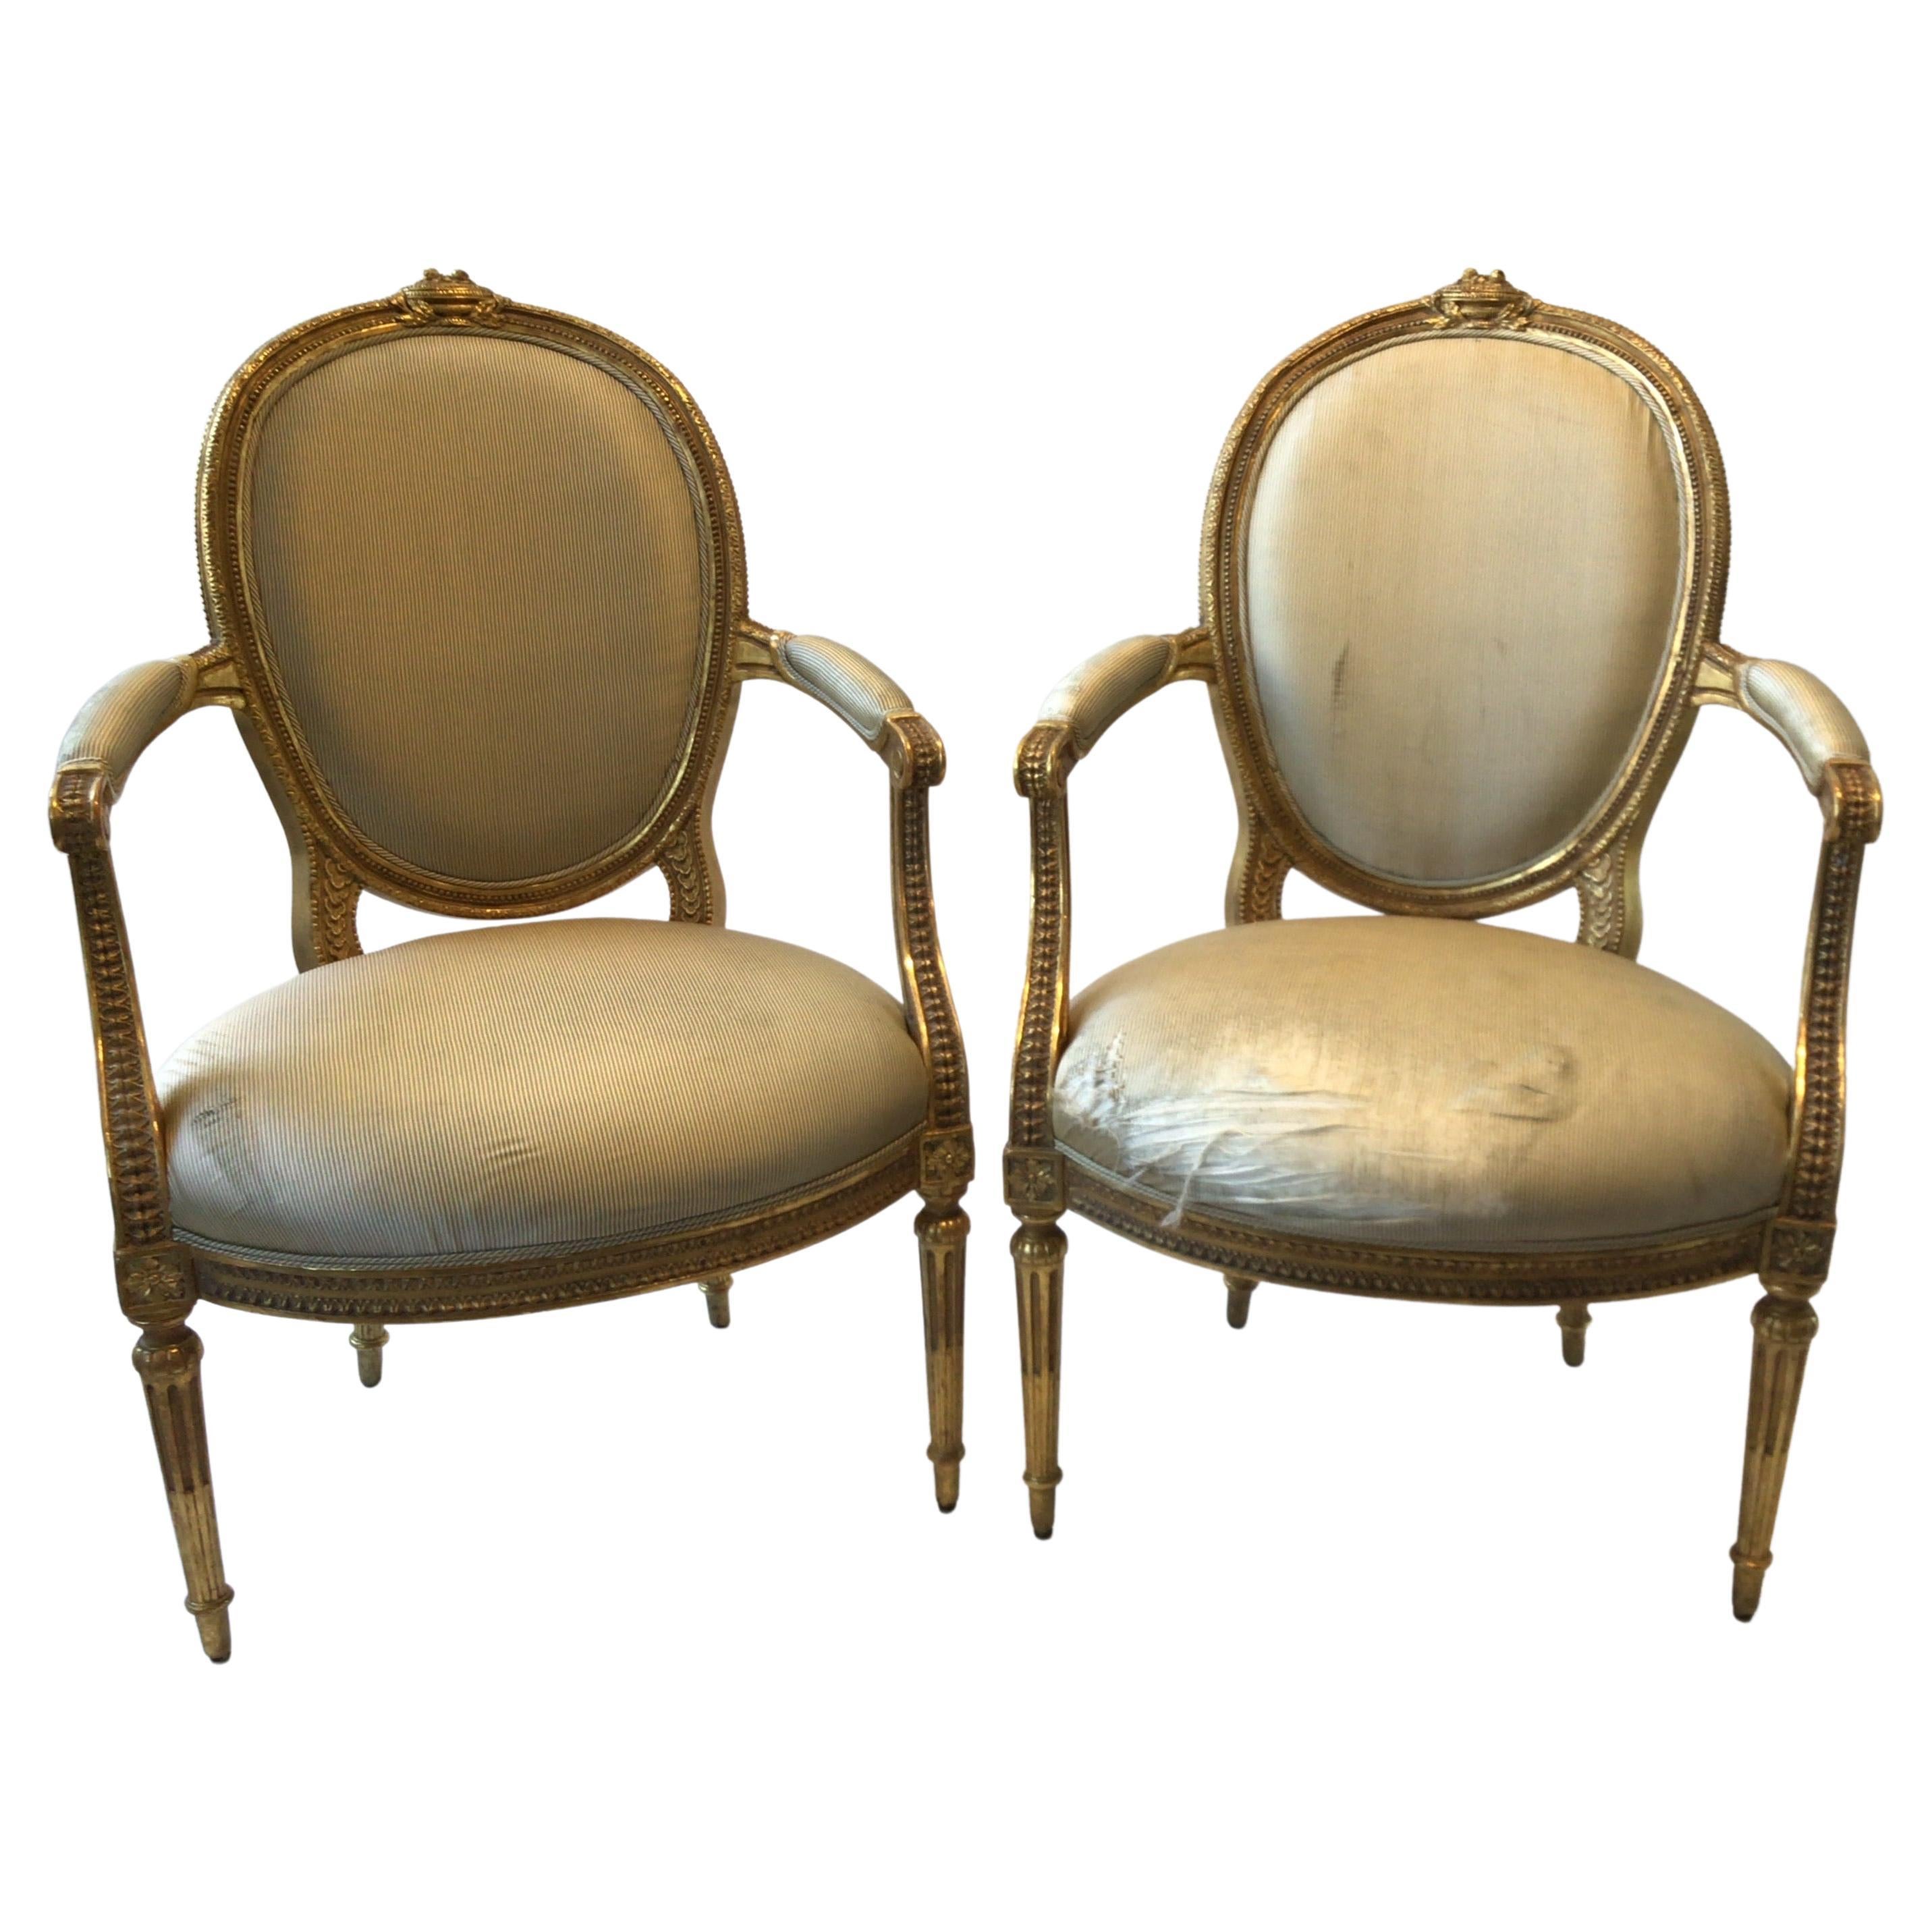 Pair of 1920s Louis XVI French Carved Wood Gilt Armchairs